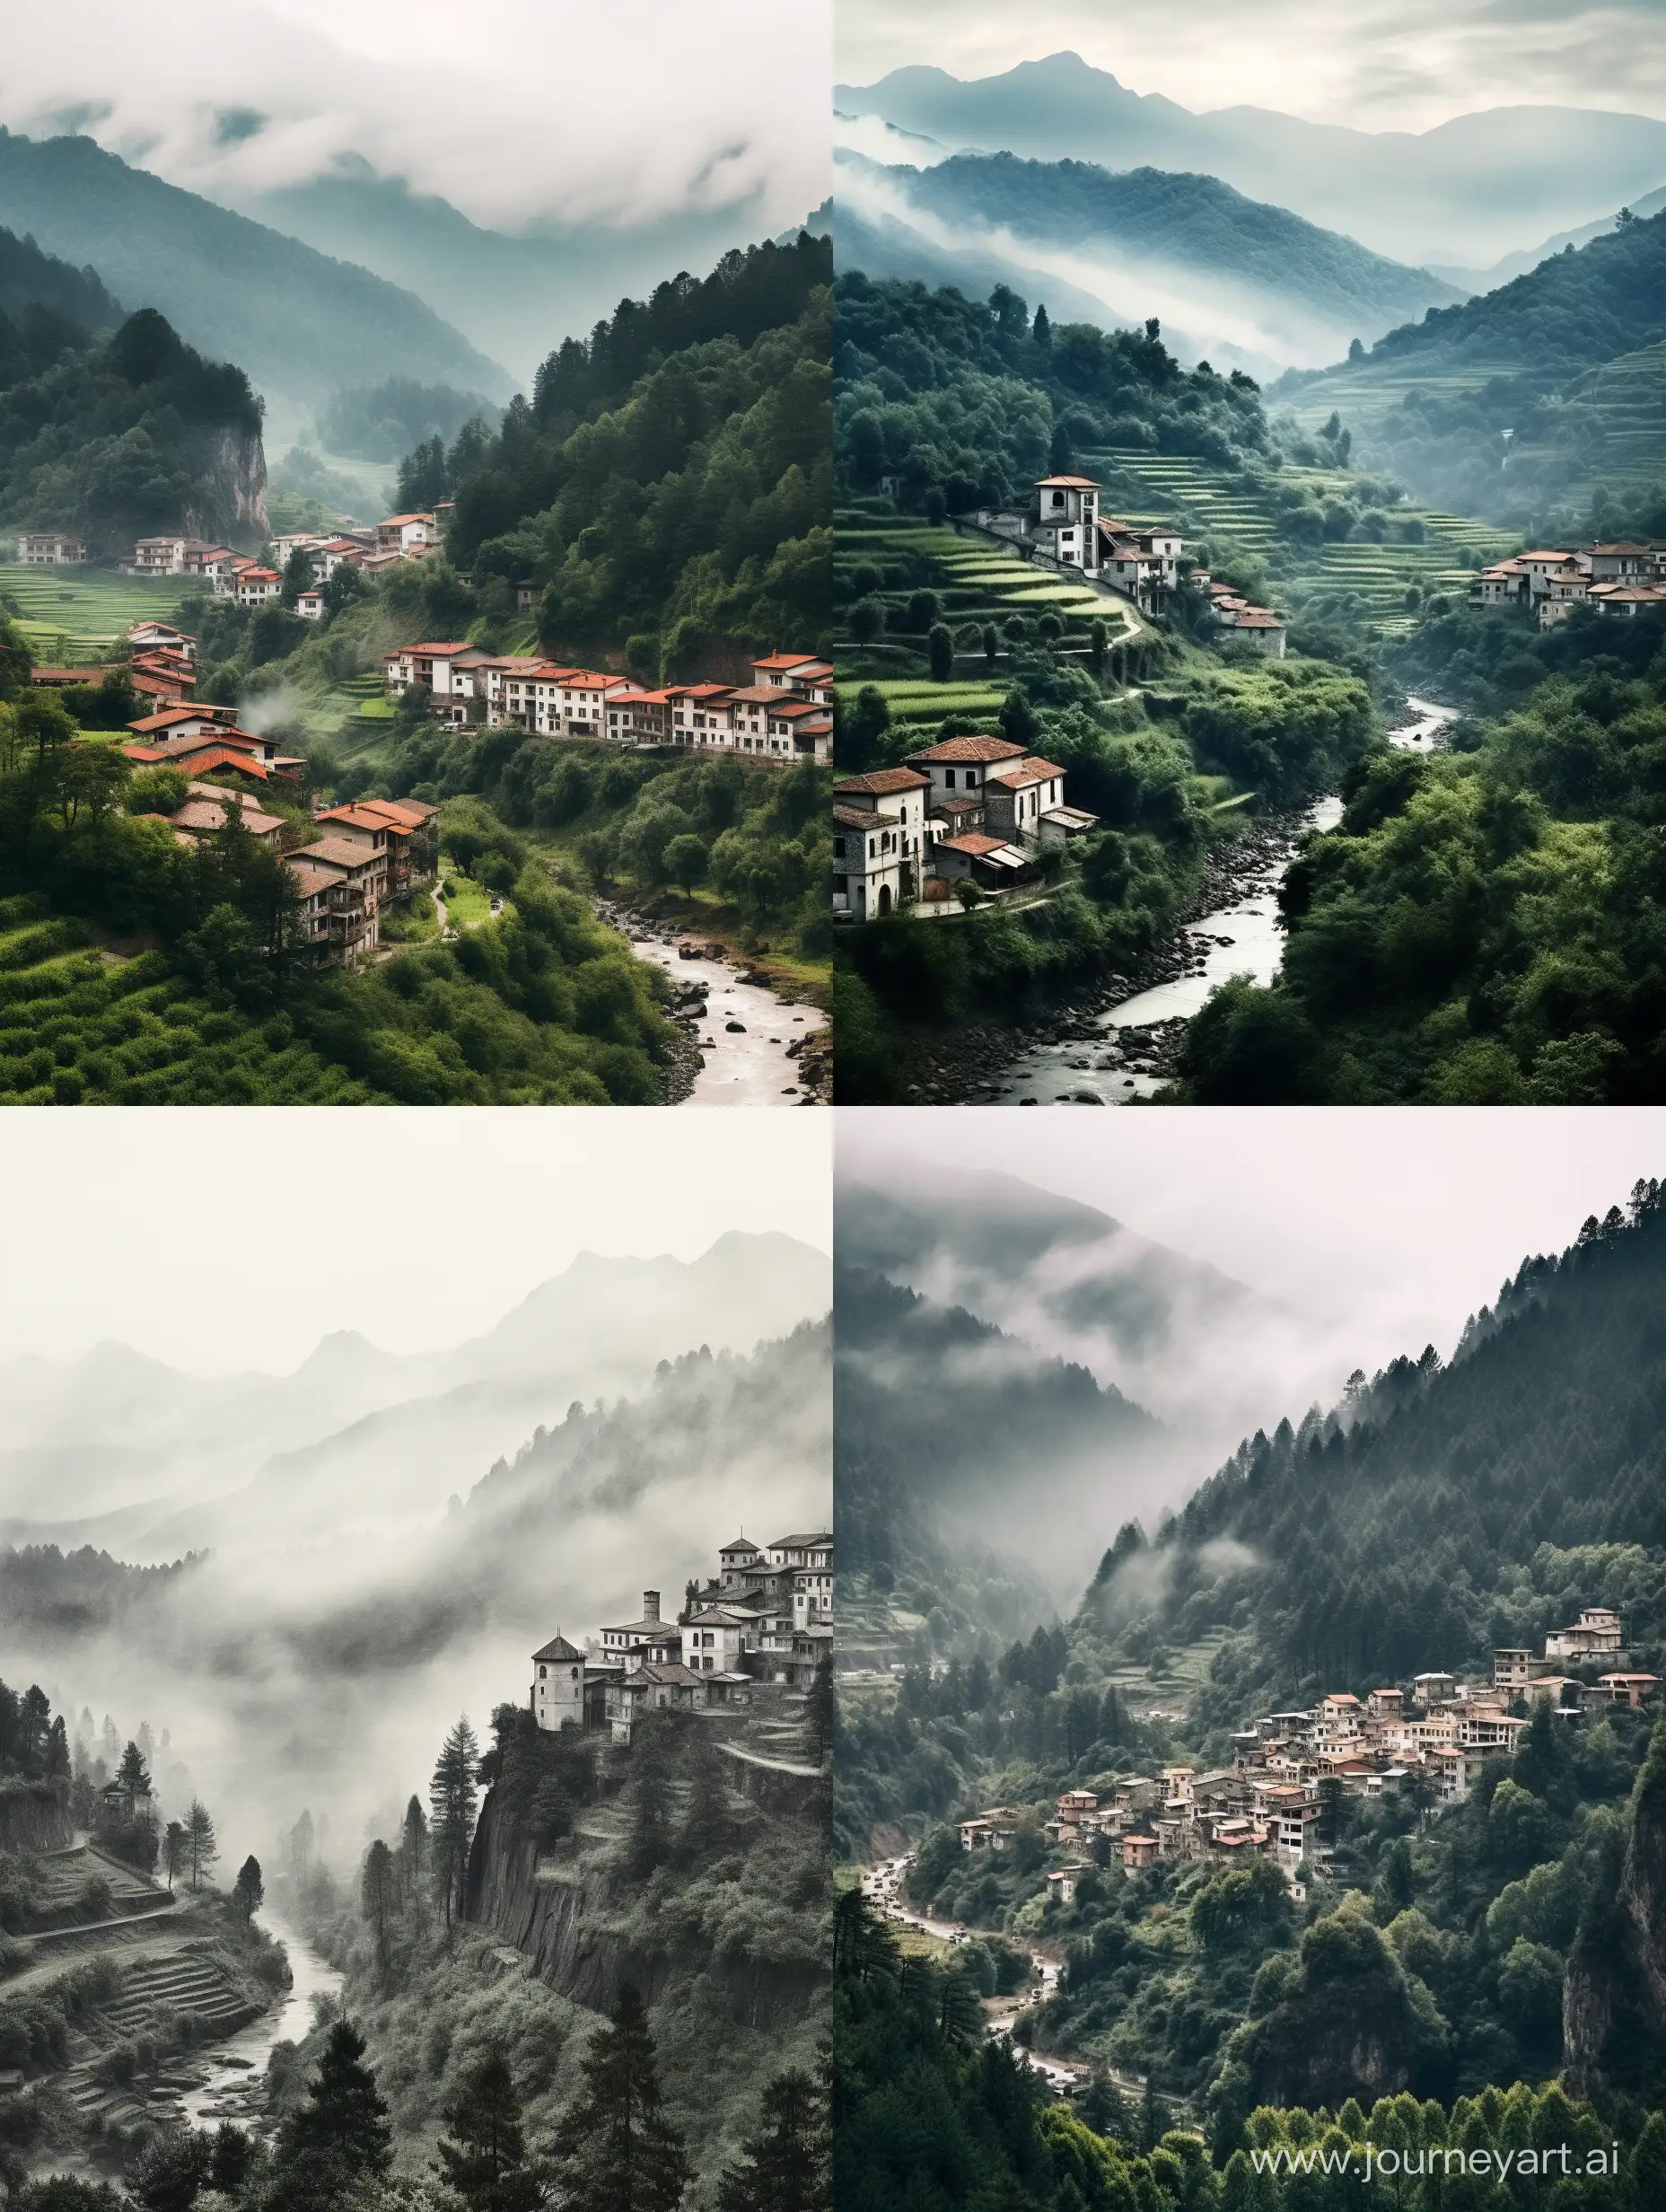 An image of an Italian village, retro, vintage, nostalgic, mobile wallpaper, 4k, realistic, photorealistic, gray and white aesthetic, detailed, forest, mountains, seen from afar